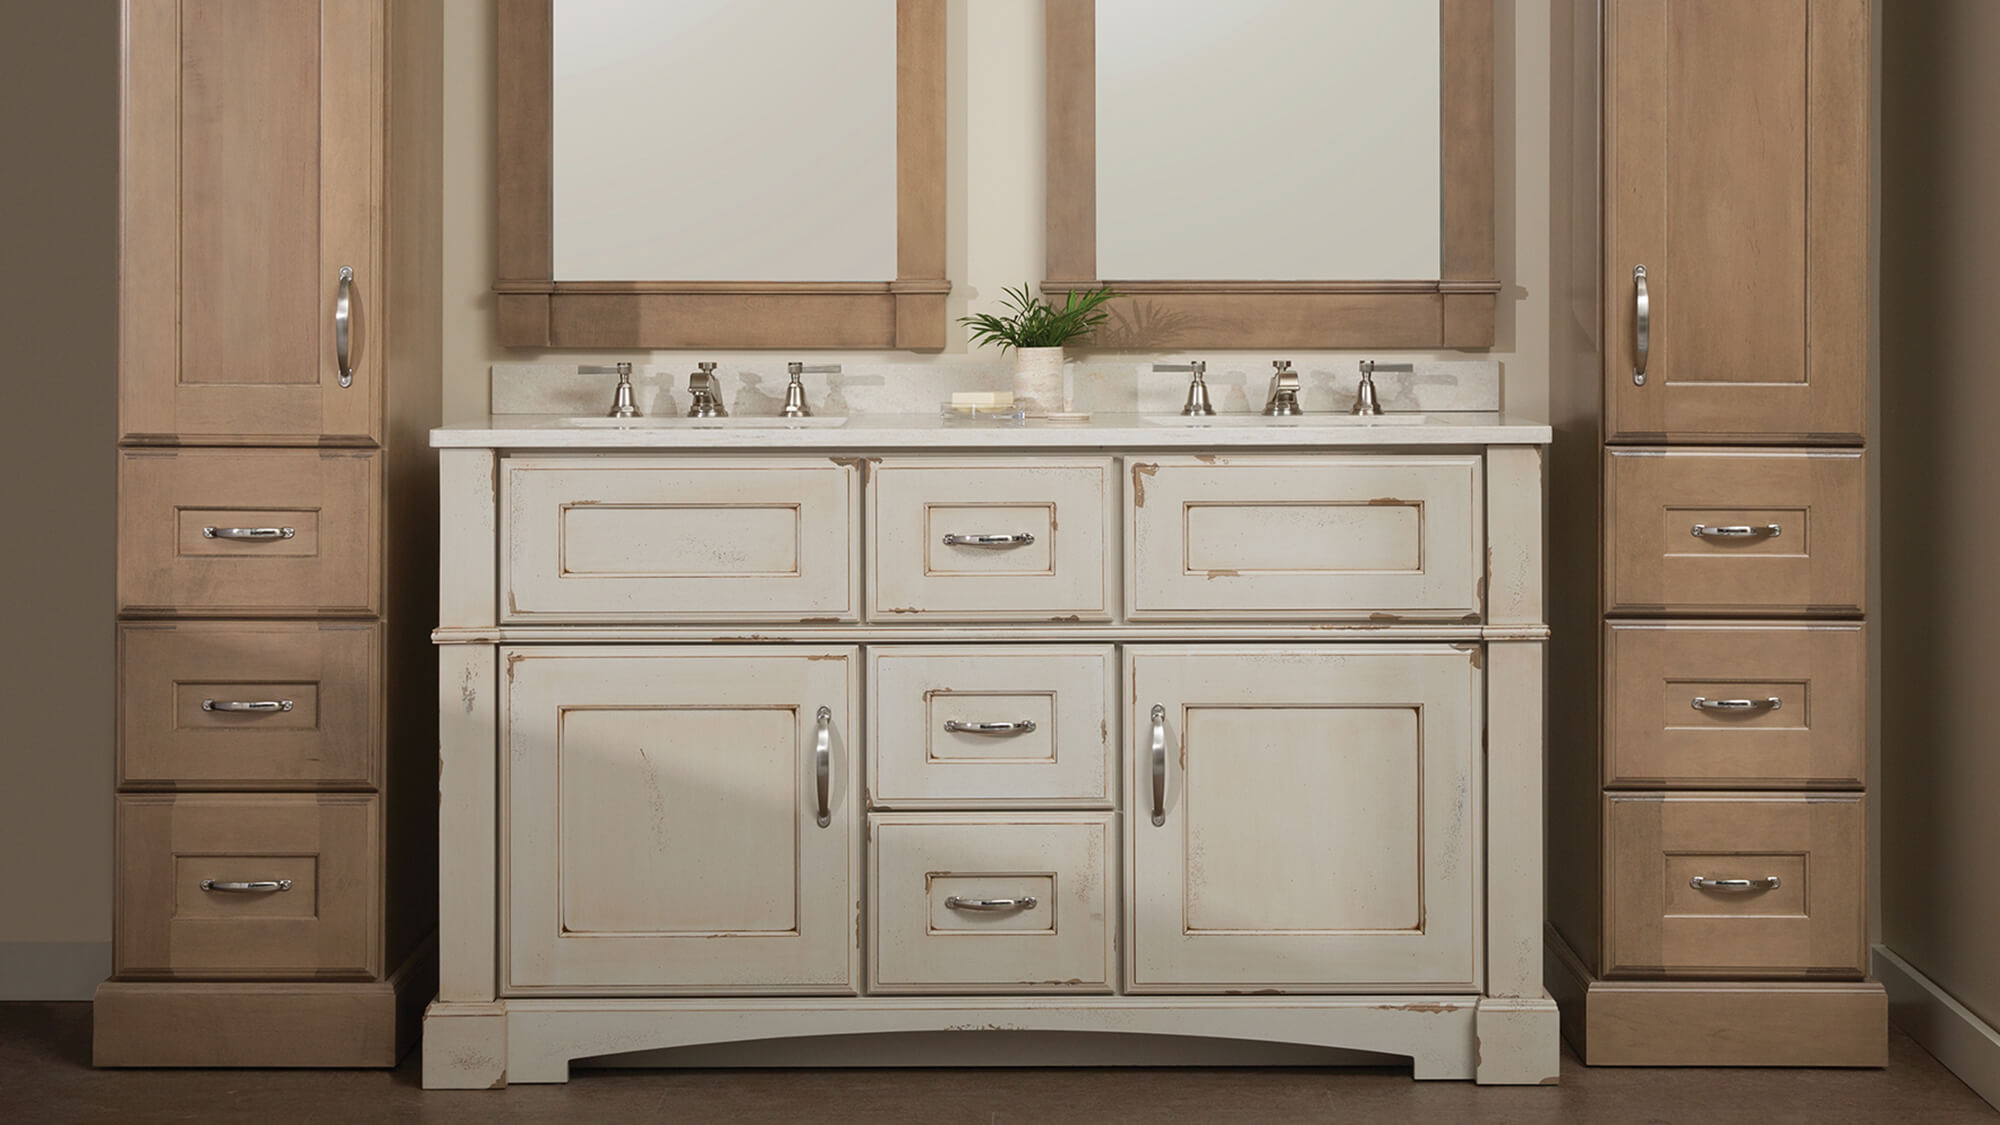 An all beige bathroom using a mix of a distressed beige painted finish on the bathroom vanity and a coordinating true-brown stained maple linen cabinets.